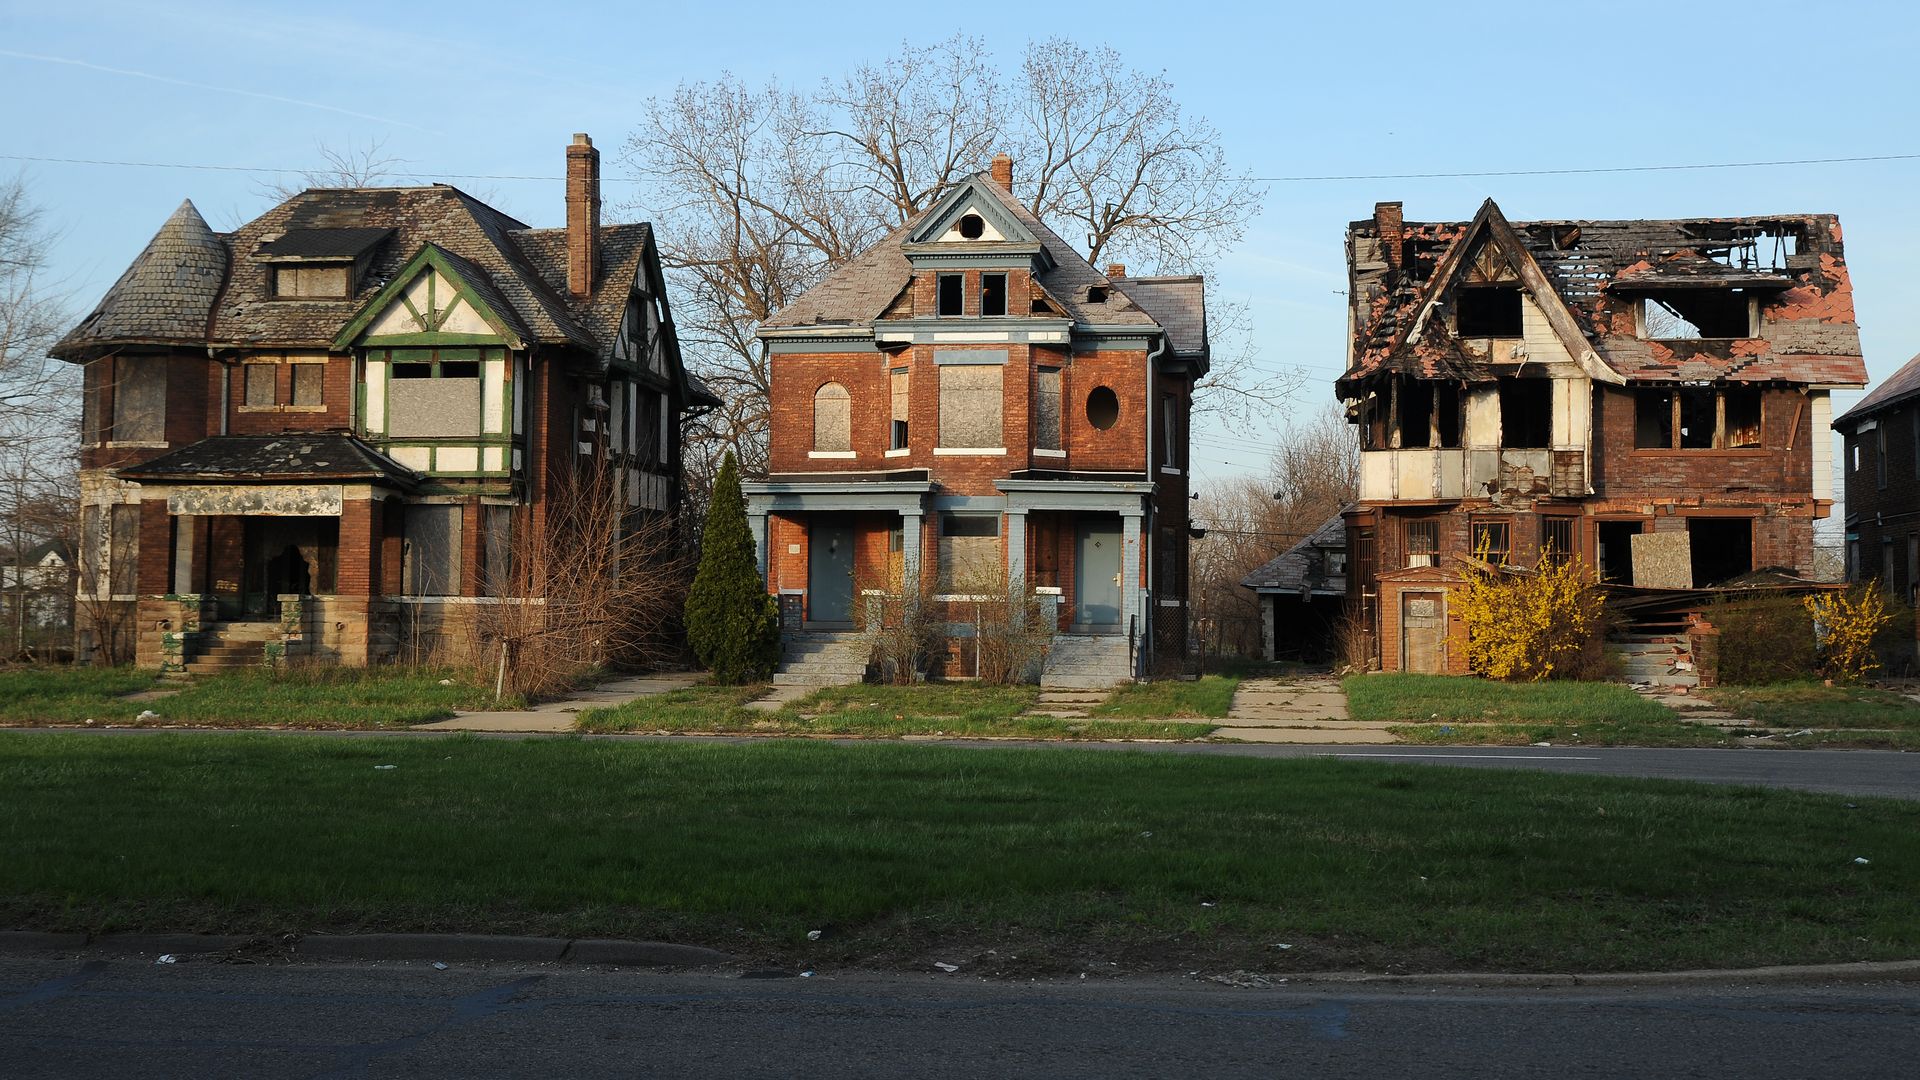 Abandoned houses in Detroit, Michigan.